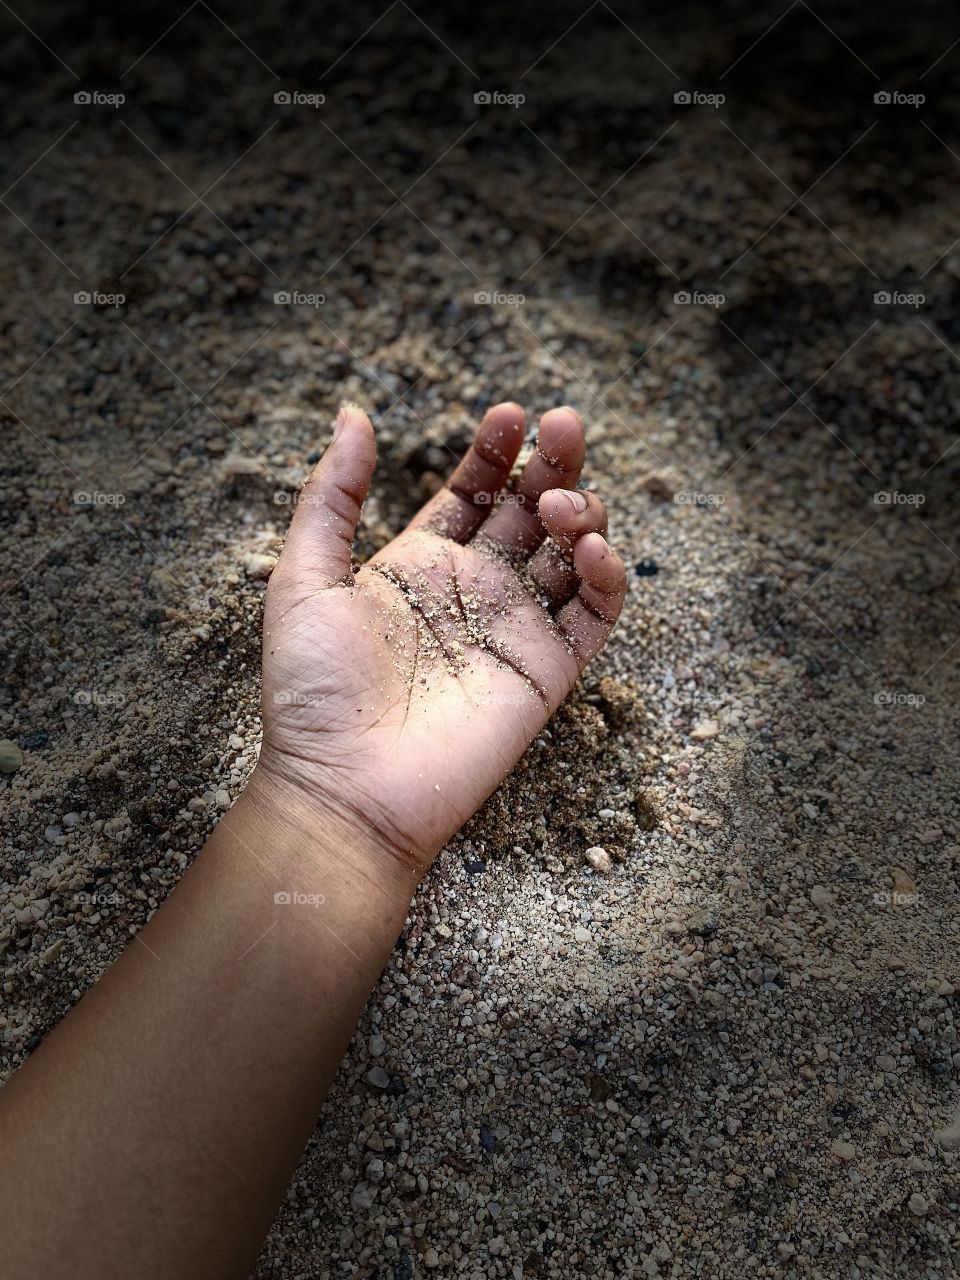 When we visited our village, my sister's first outing was playing with soil and water